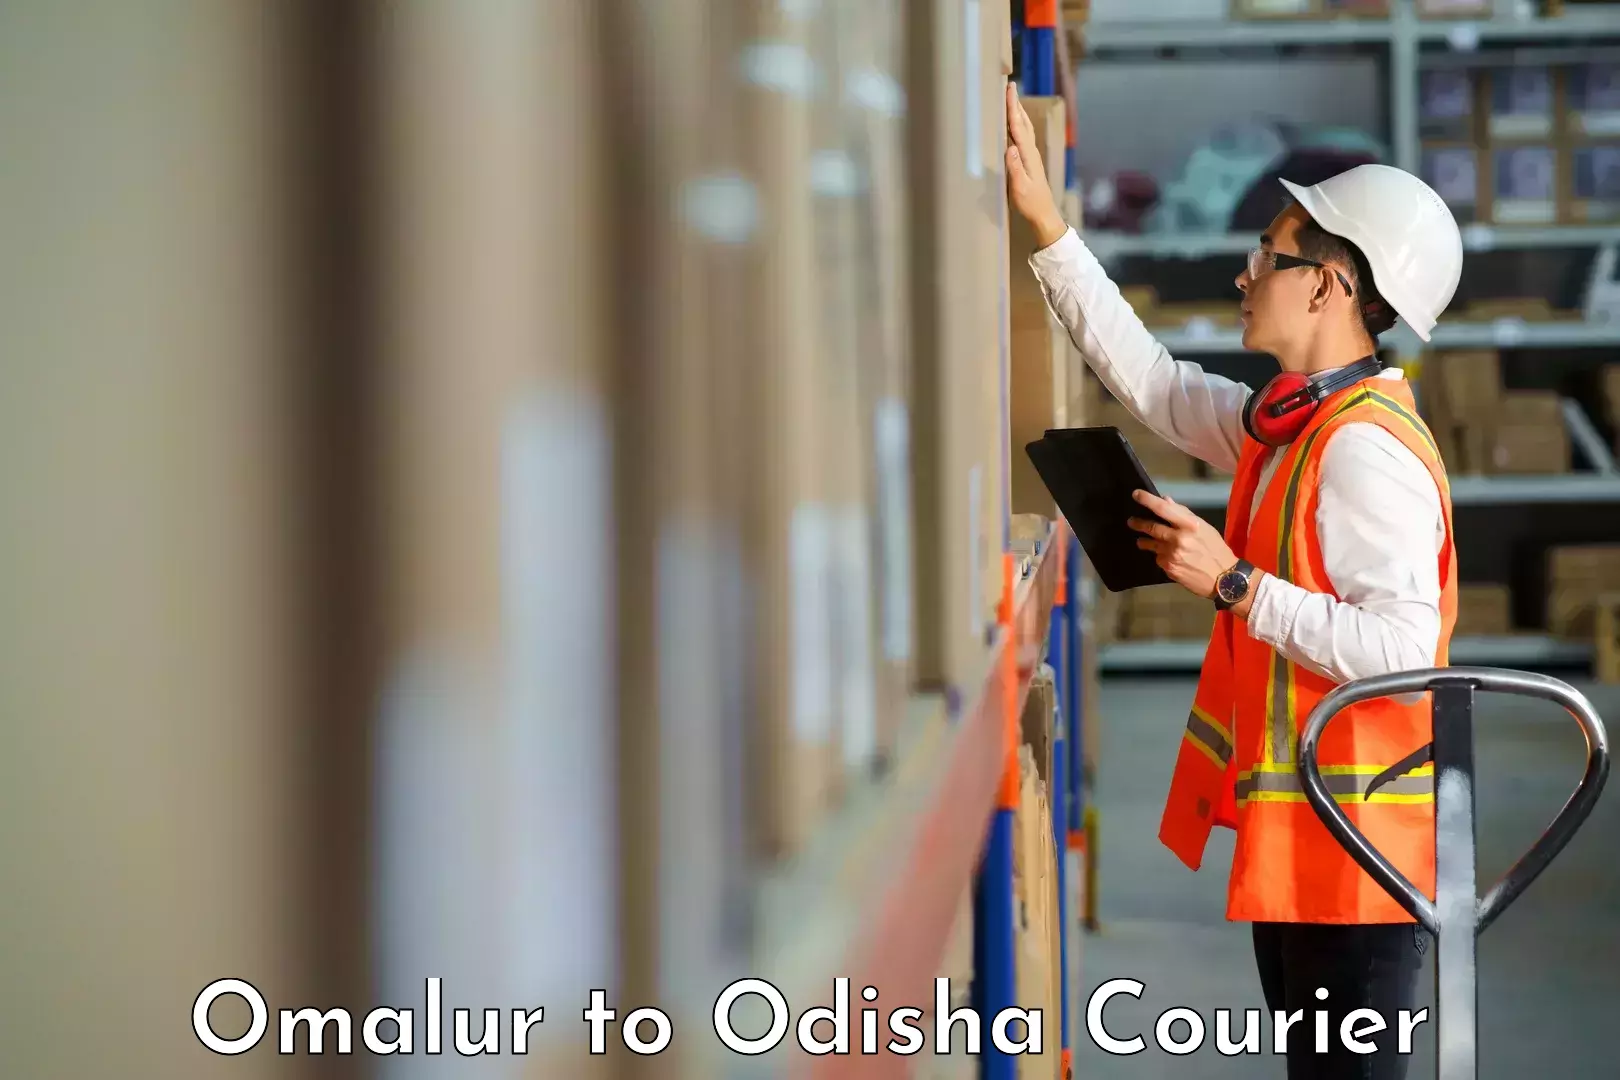 Sustainable shipping practices in Omalur to Odisha